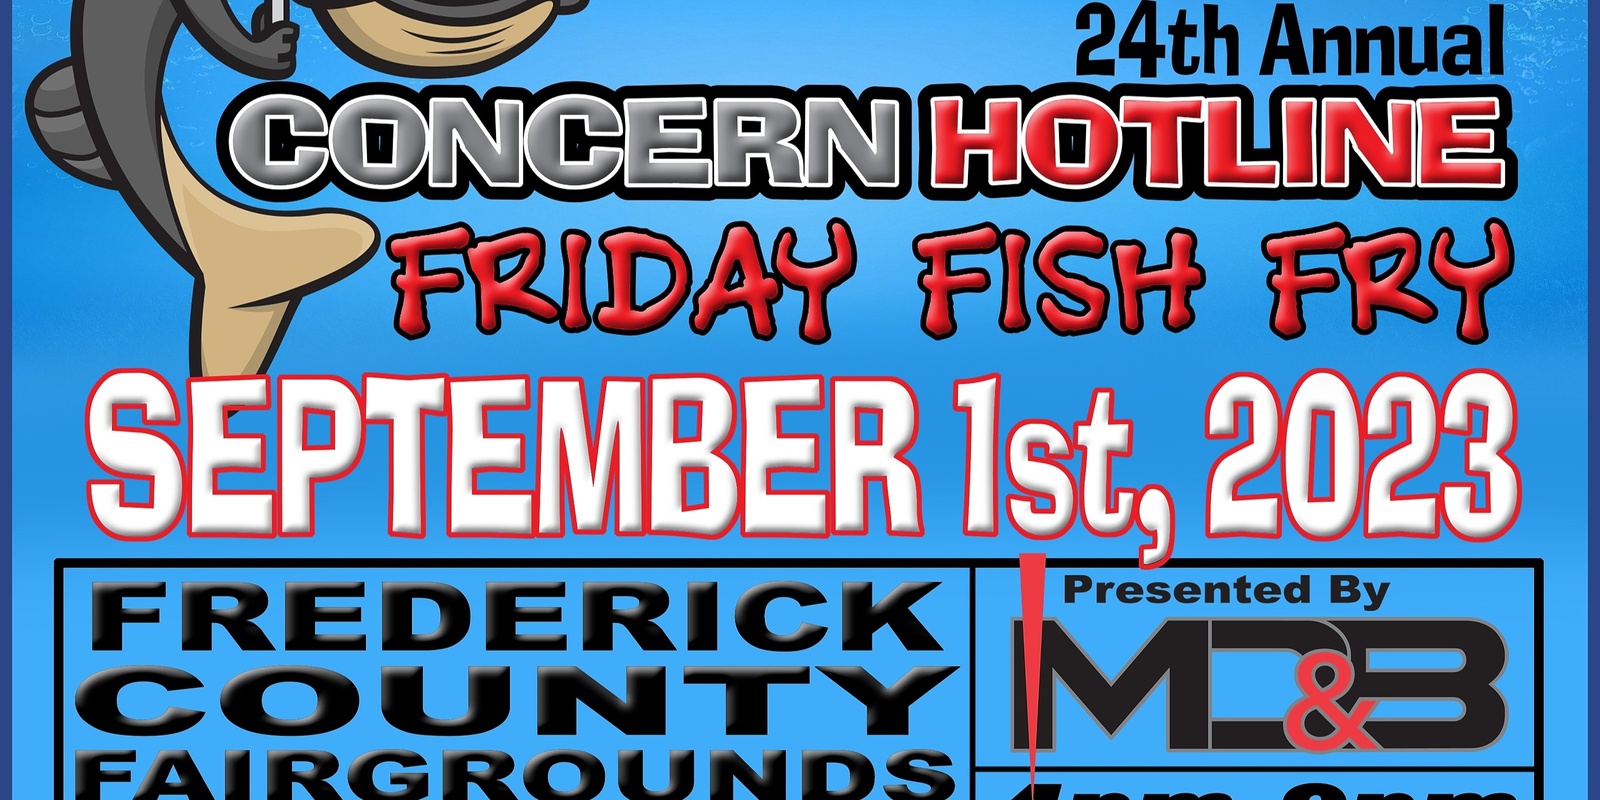 Banner image for Concern Hotline's 24th Annual Friday Fish Fry Celebration